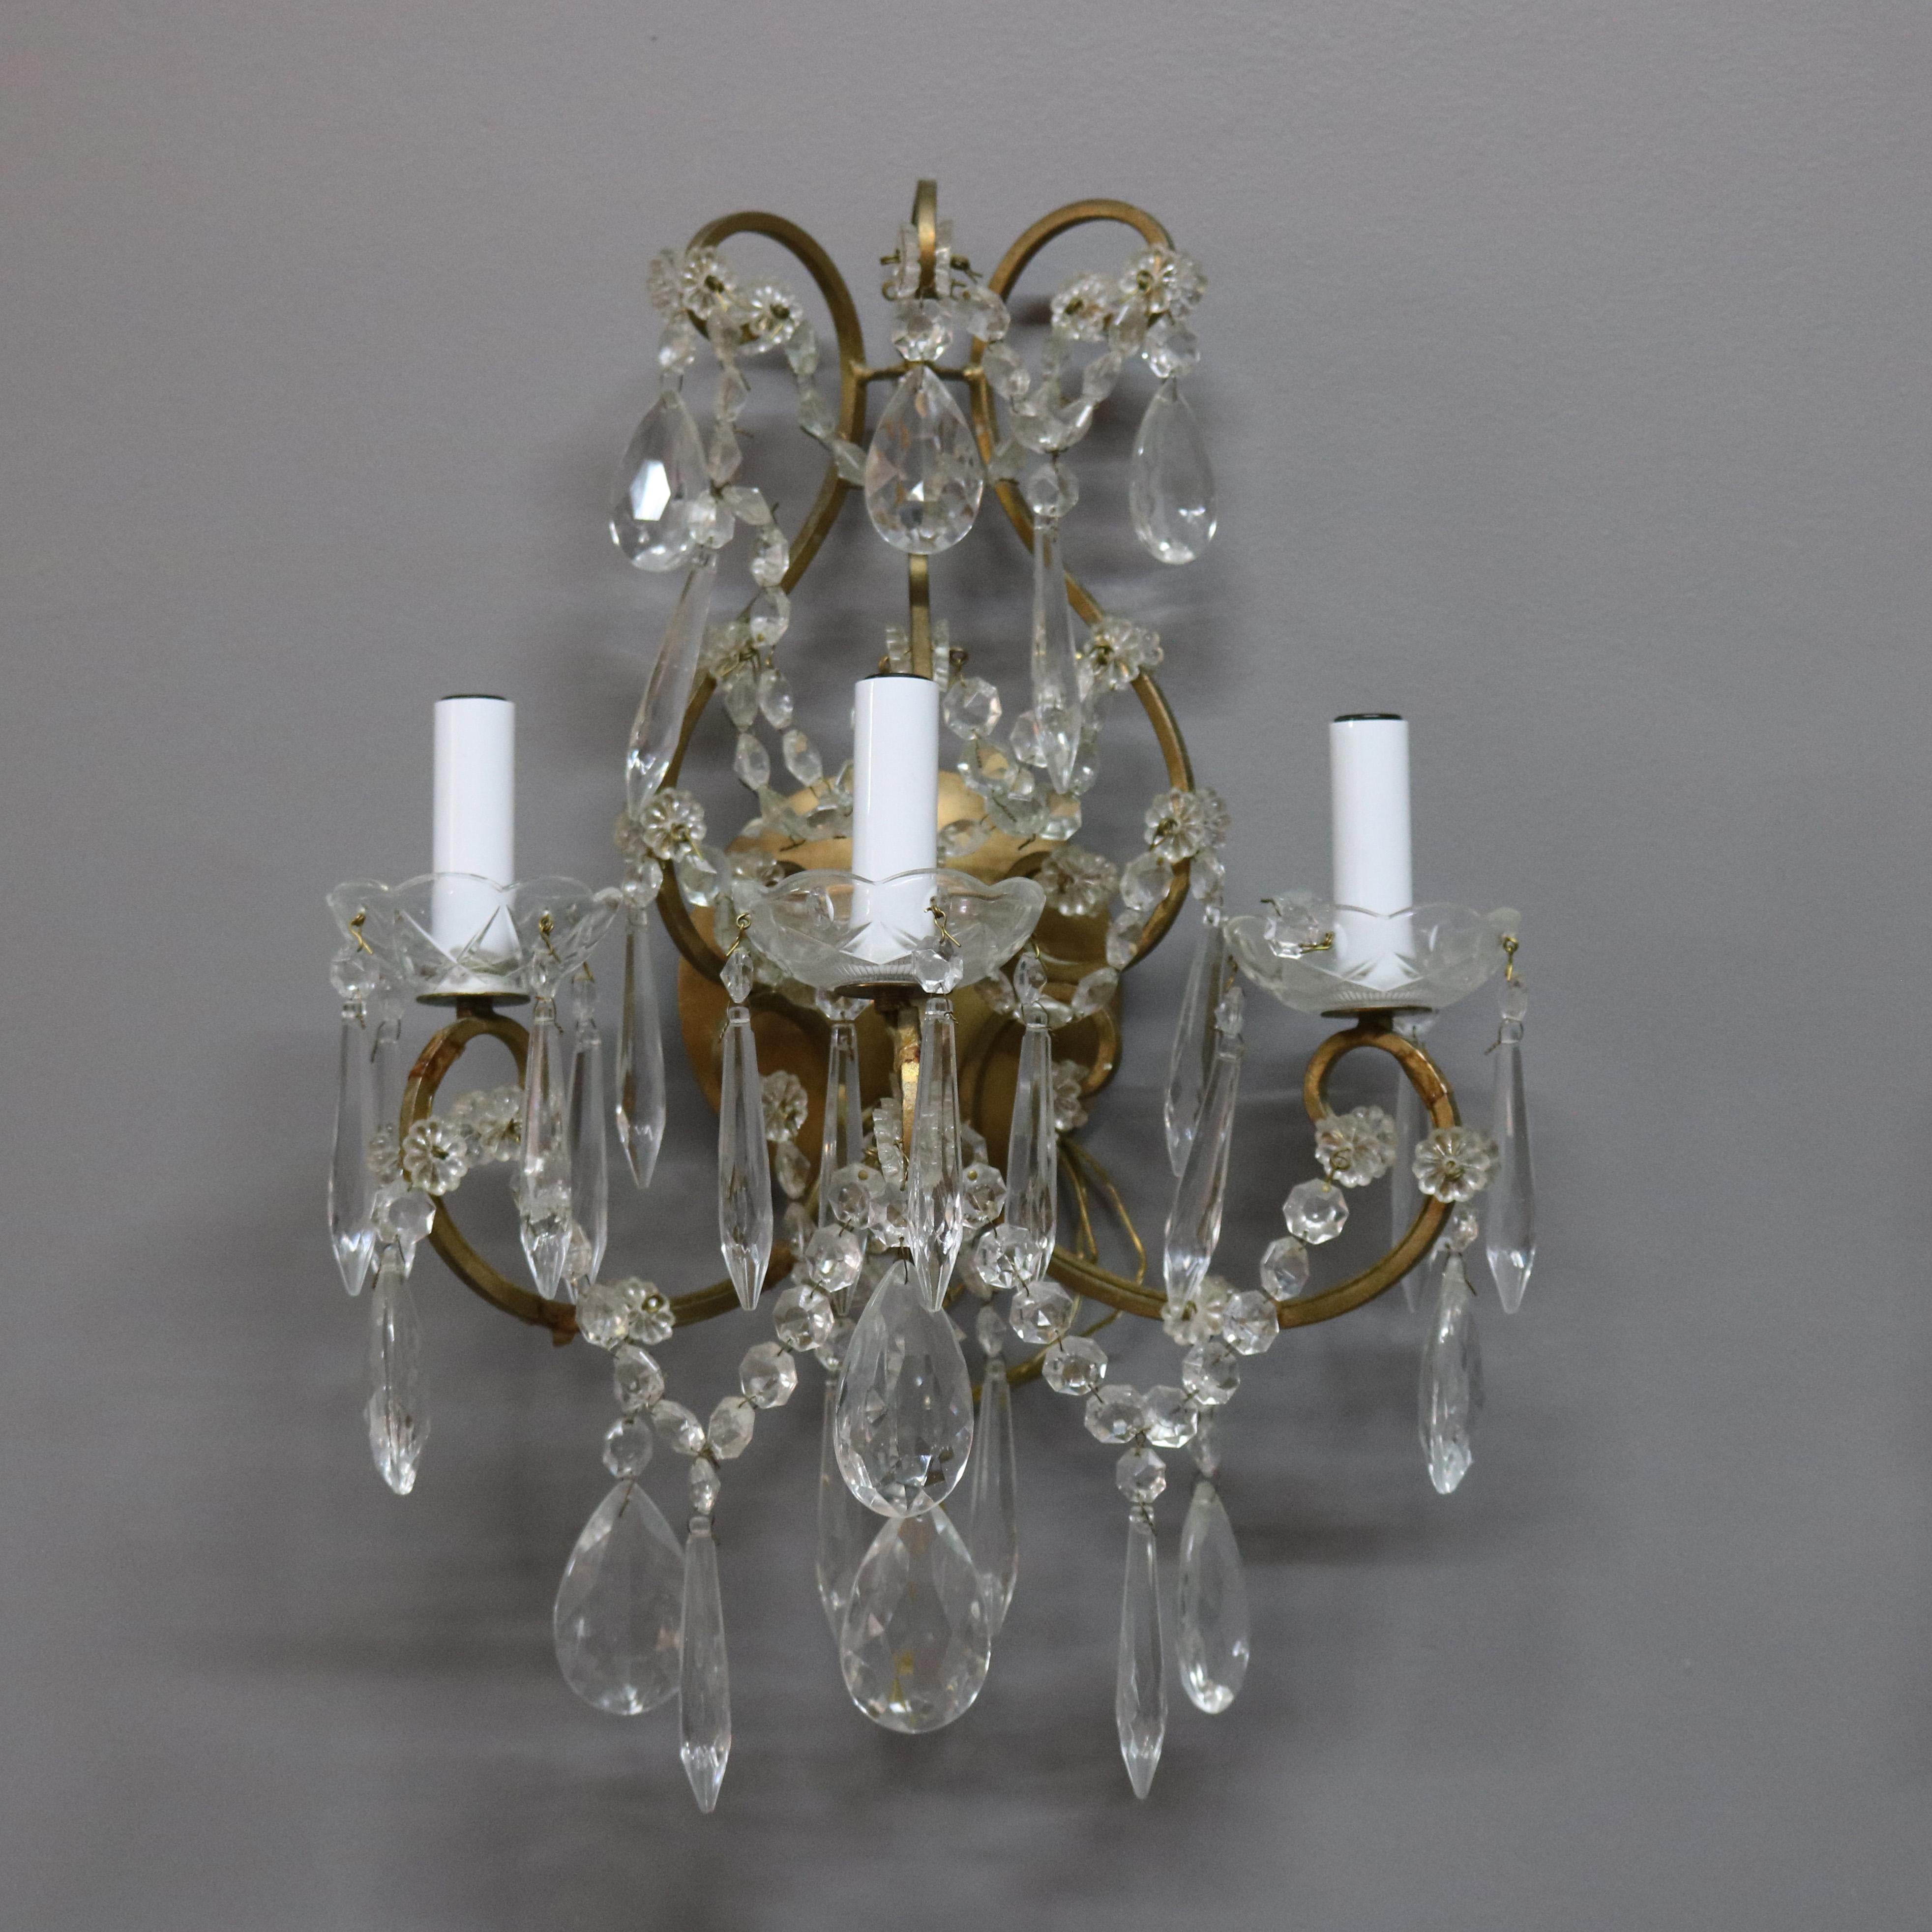 A vintage pair of French wall sconces offer brass scroll form frame with three arms terminating in candle lights, strung and hanging cut crystals throughout, circa 1940.

***DELIVERY NOTICE – Due to COVID-19 we are employing NO-CONTACT PRACTICES in